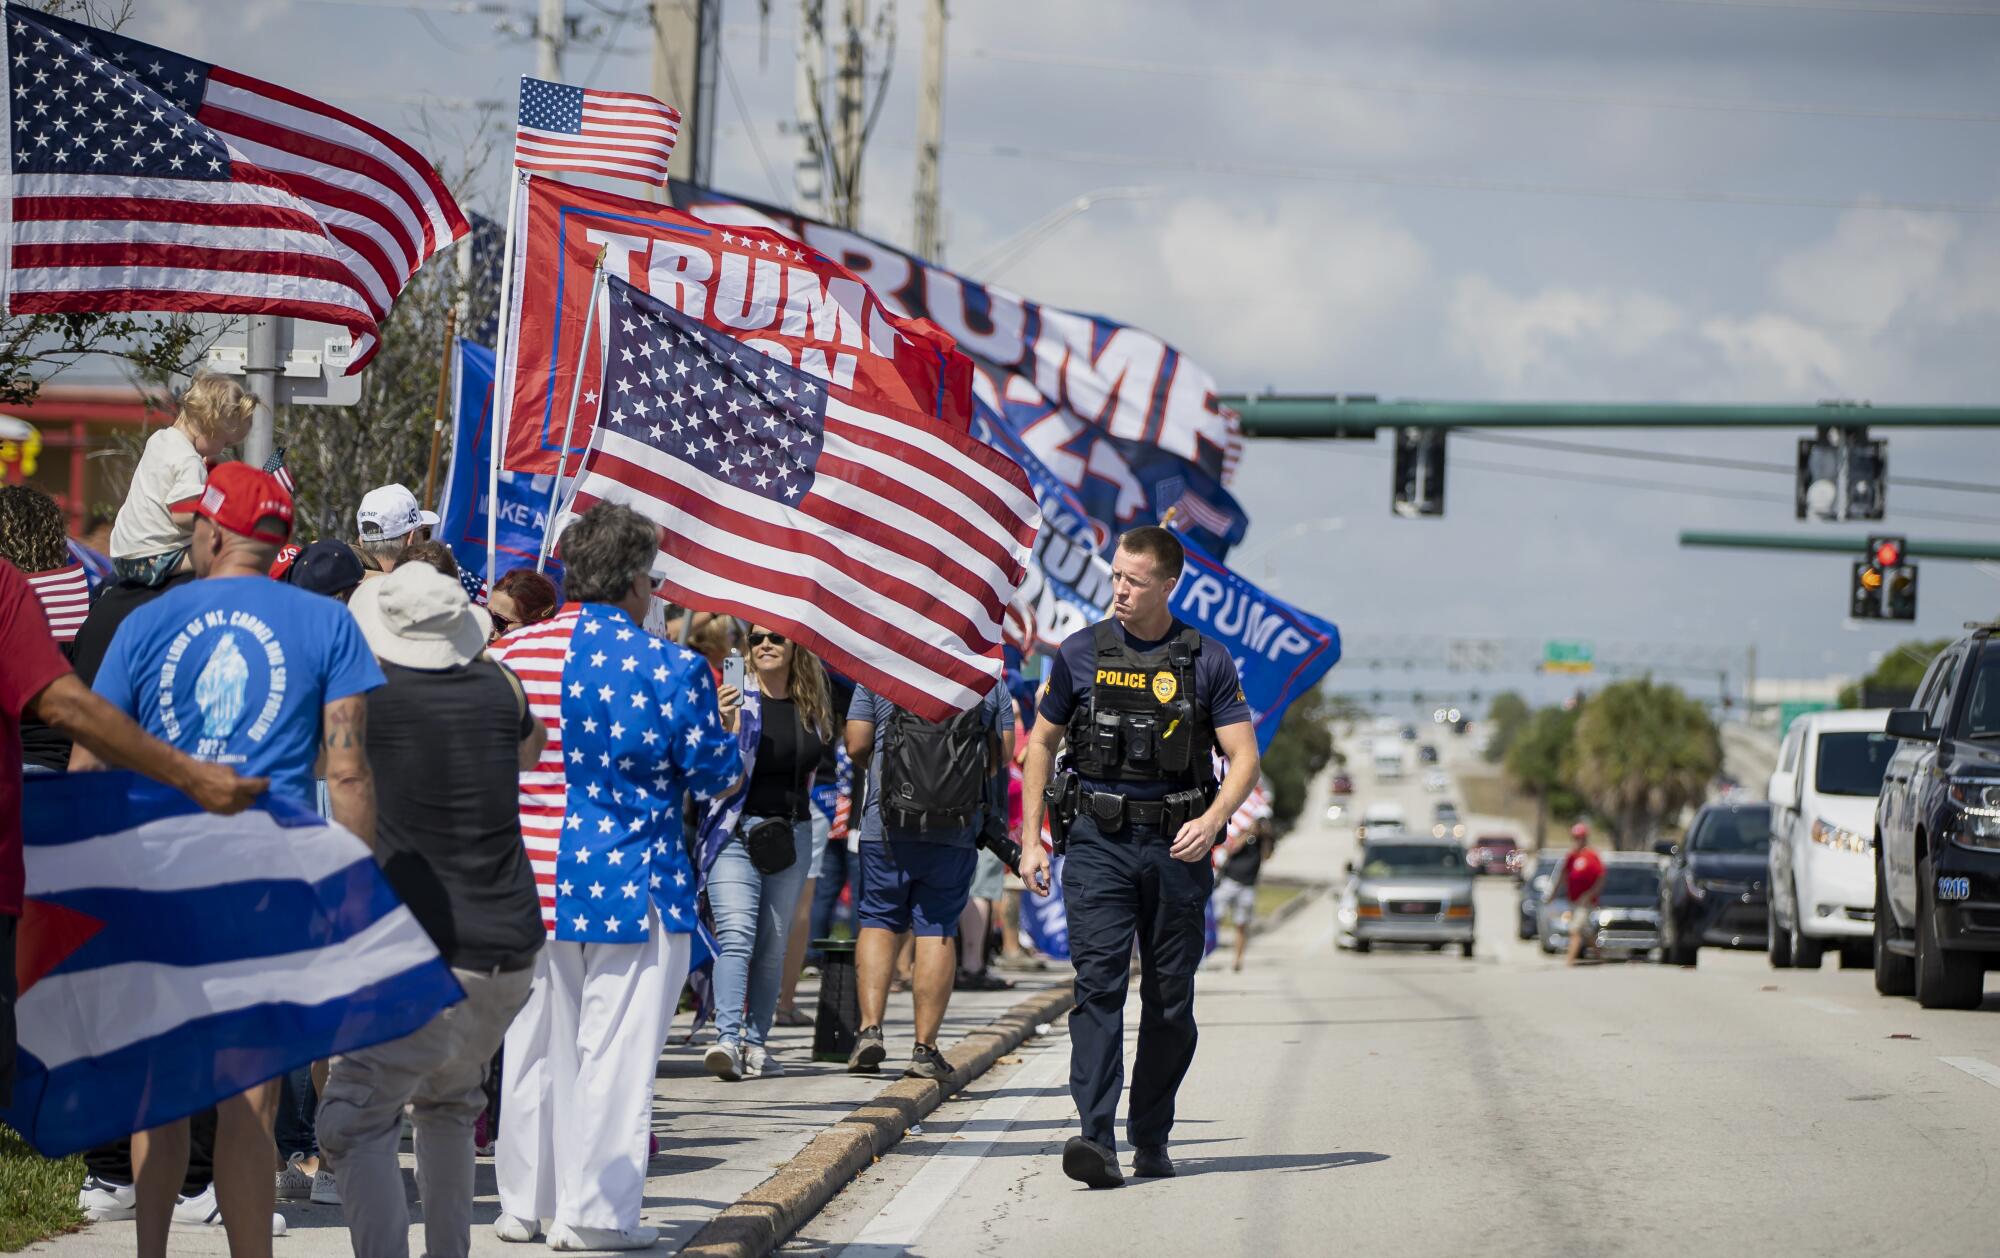 A police officers walks along a row of people standing by a road with U.S. flags and Trump flags.